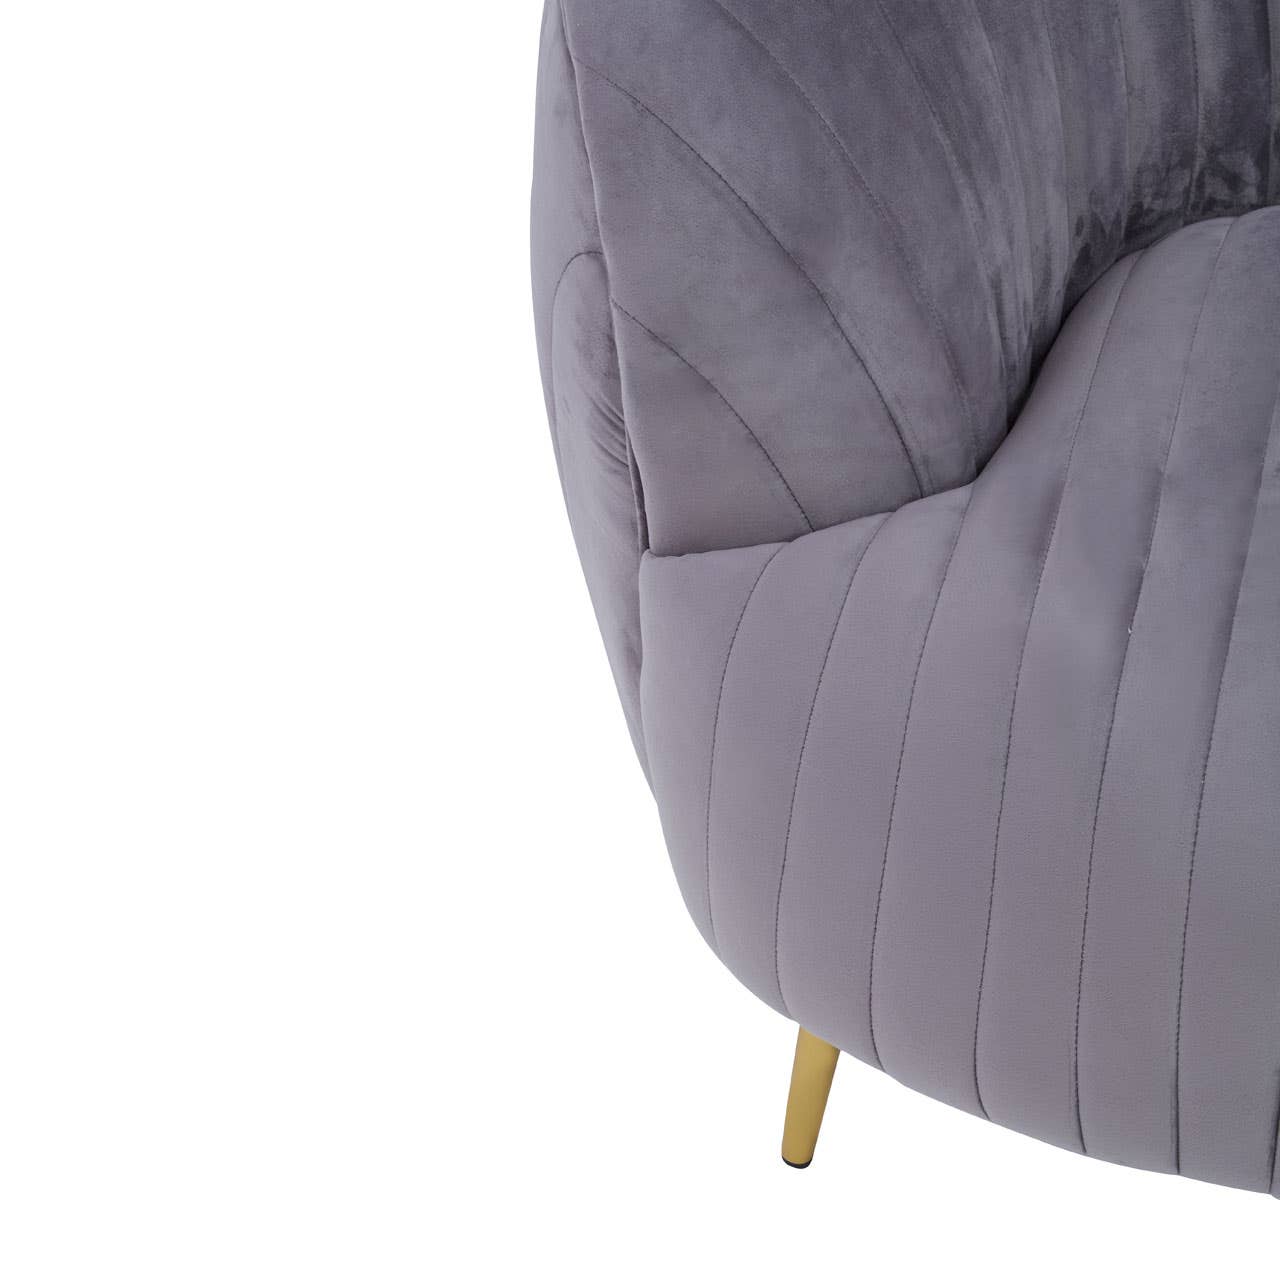 Noosa & Co. Living Florina Grey Velvet Chair With Gold Legs House of Isabella UK